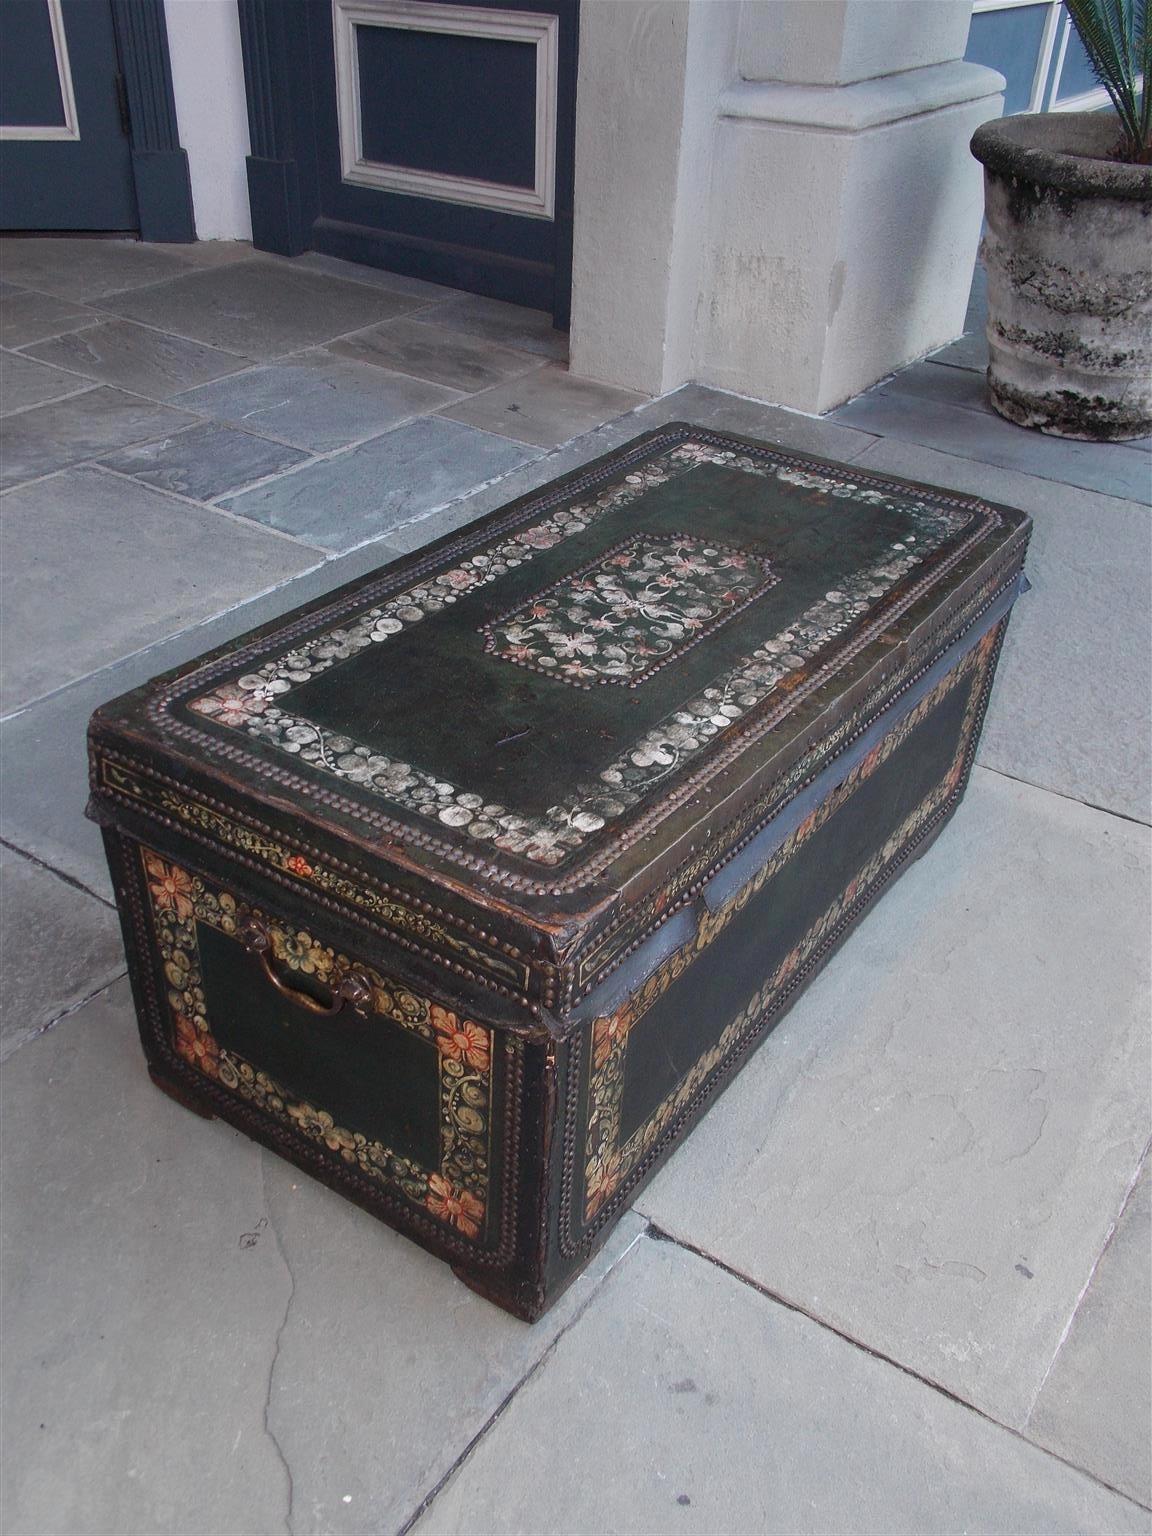 Chinese export leather clad polychrome and painted camphor wood trunk with flanking side handles and brass nail head trim.  Early 19th century.